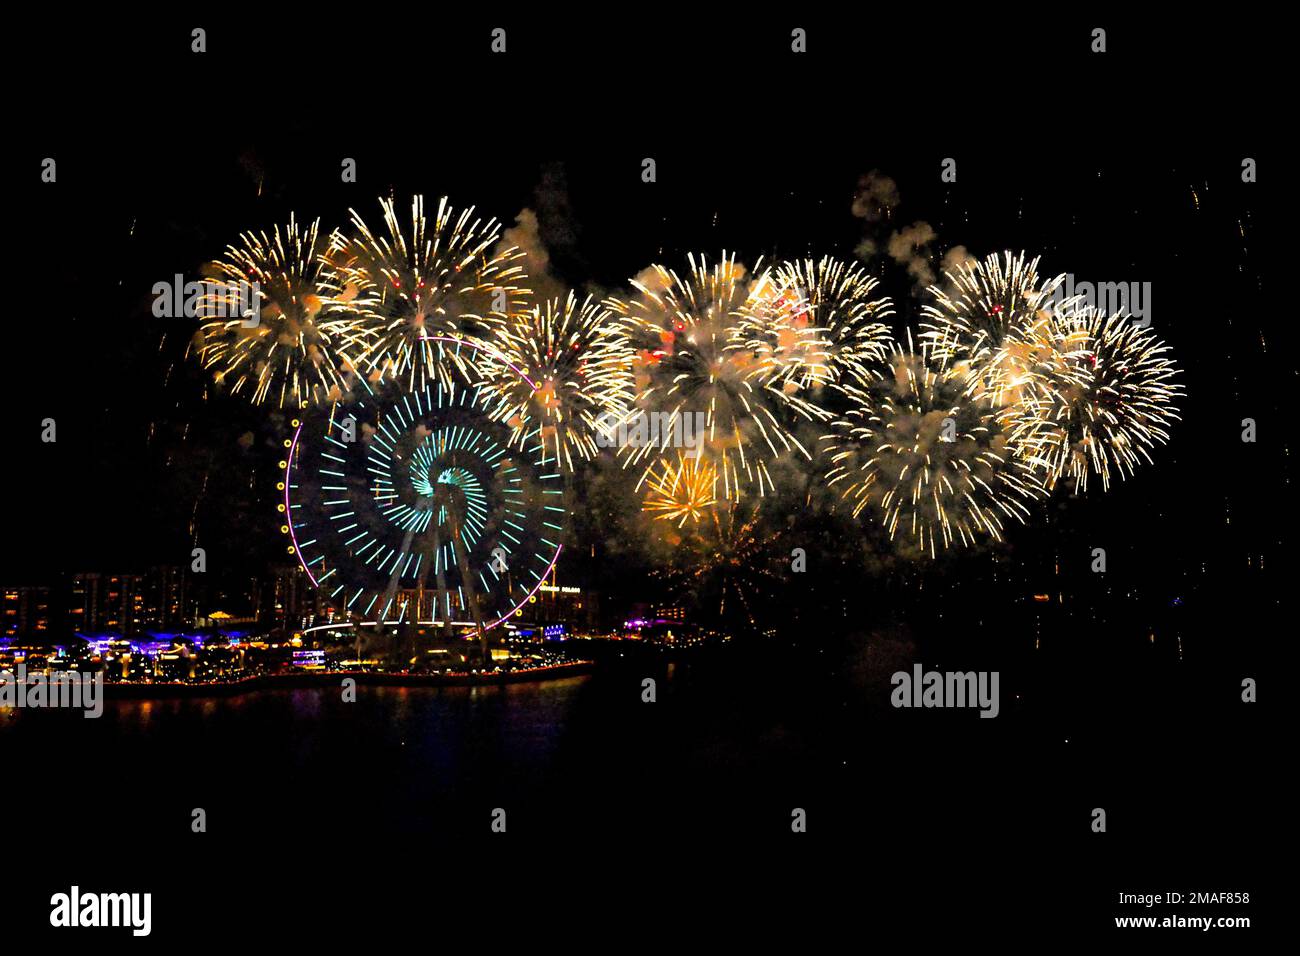 Bright fireworks in front of the Dubai Wheel overlooking the Persian Gulf on New Year's Eve Stock Photo